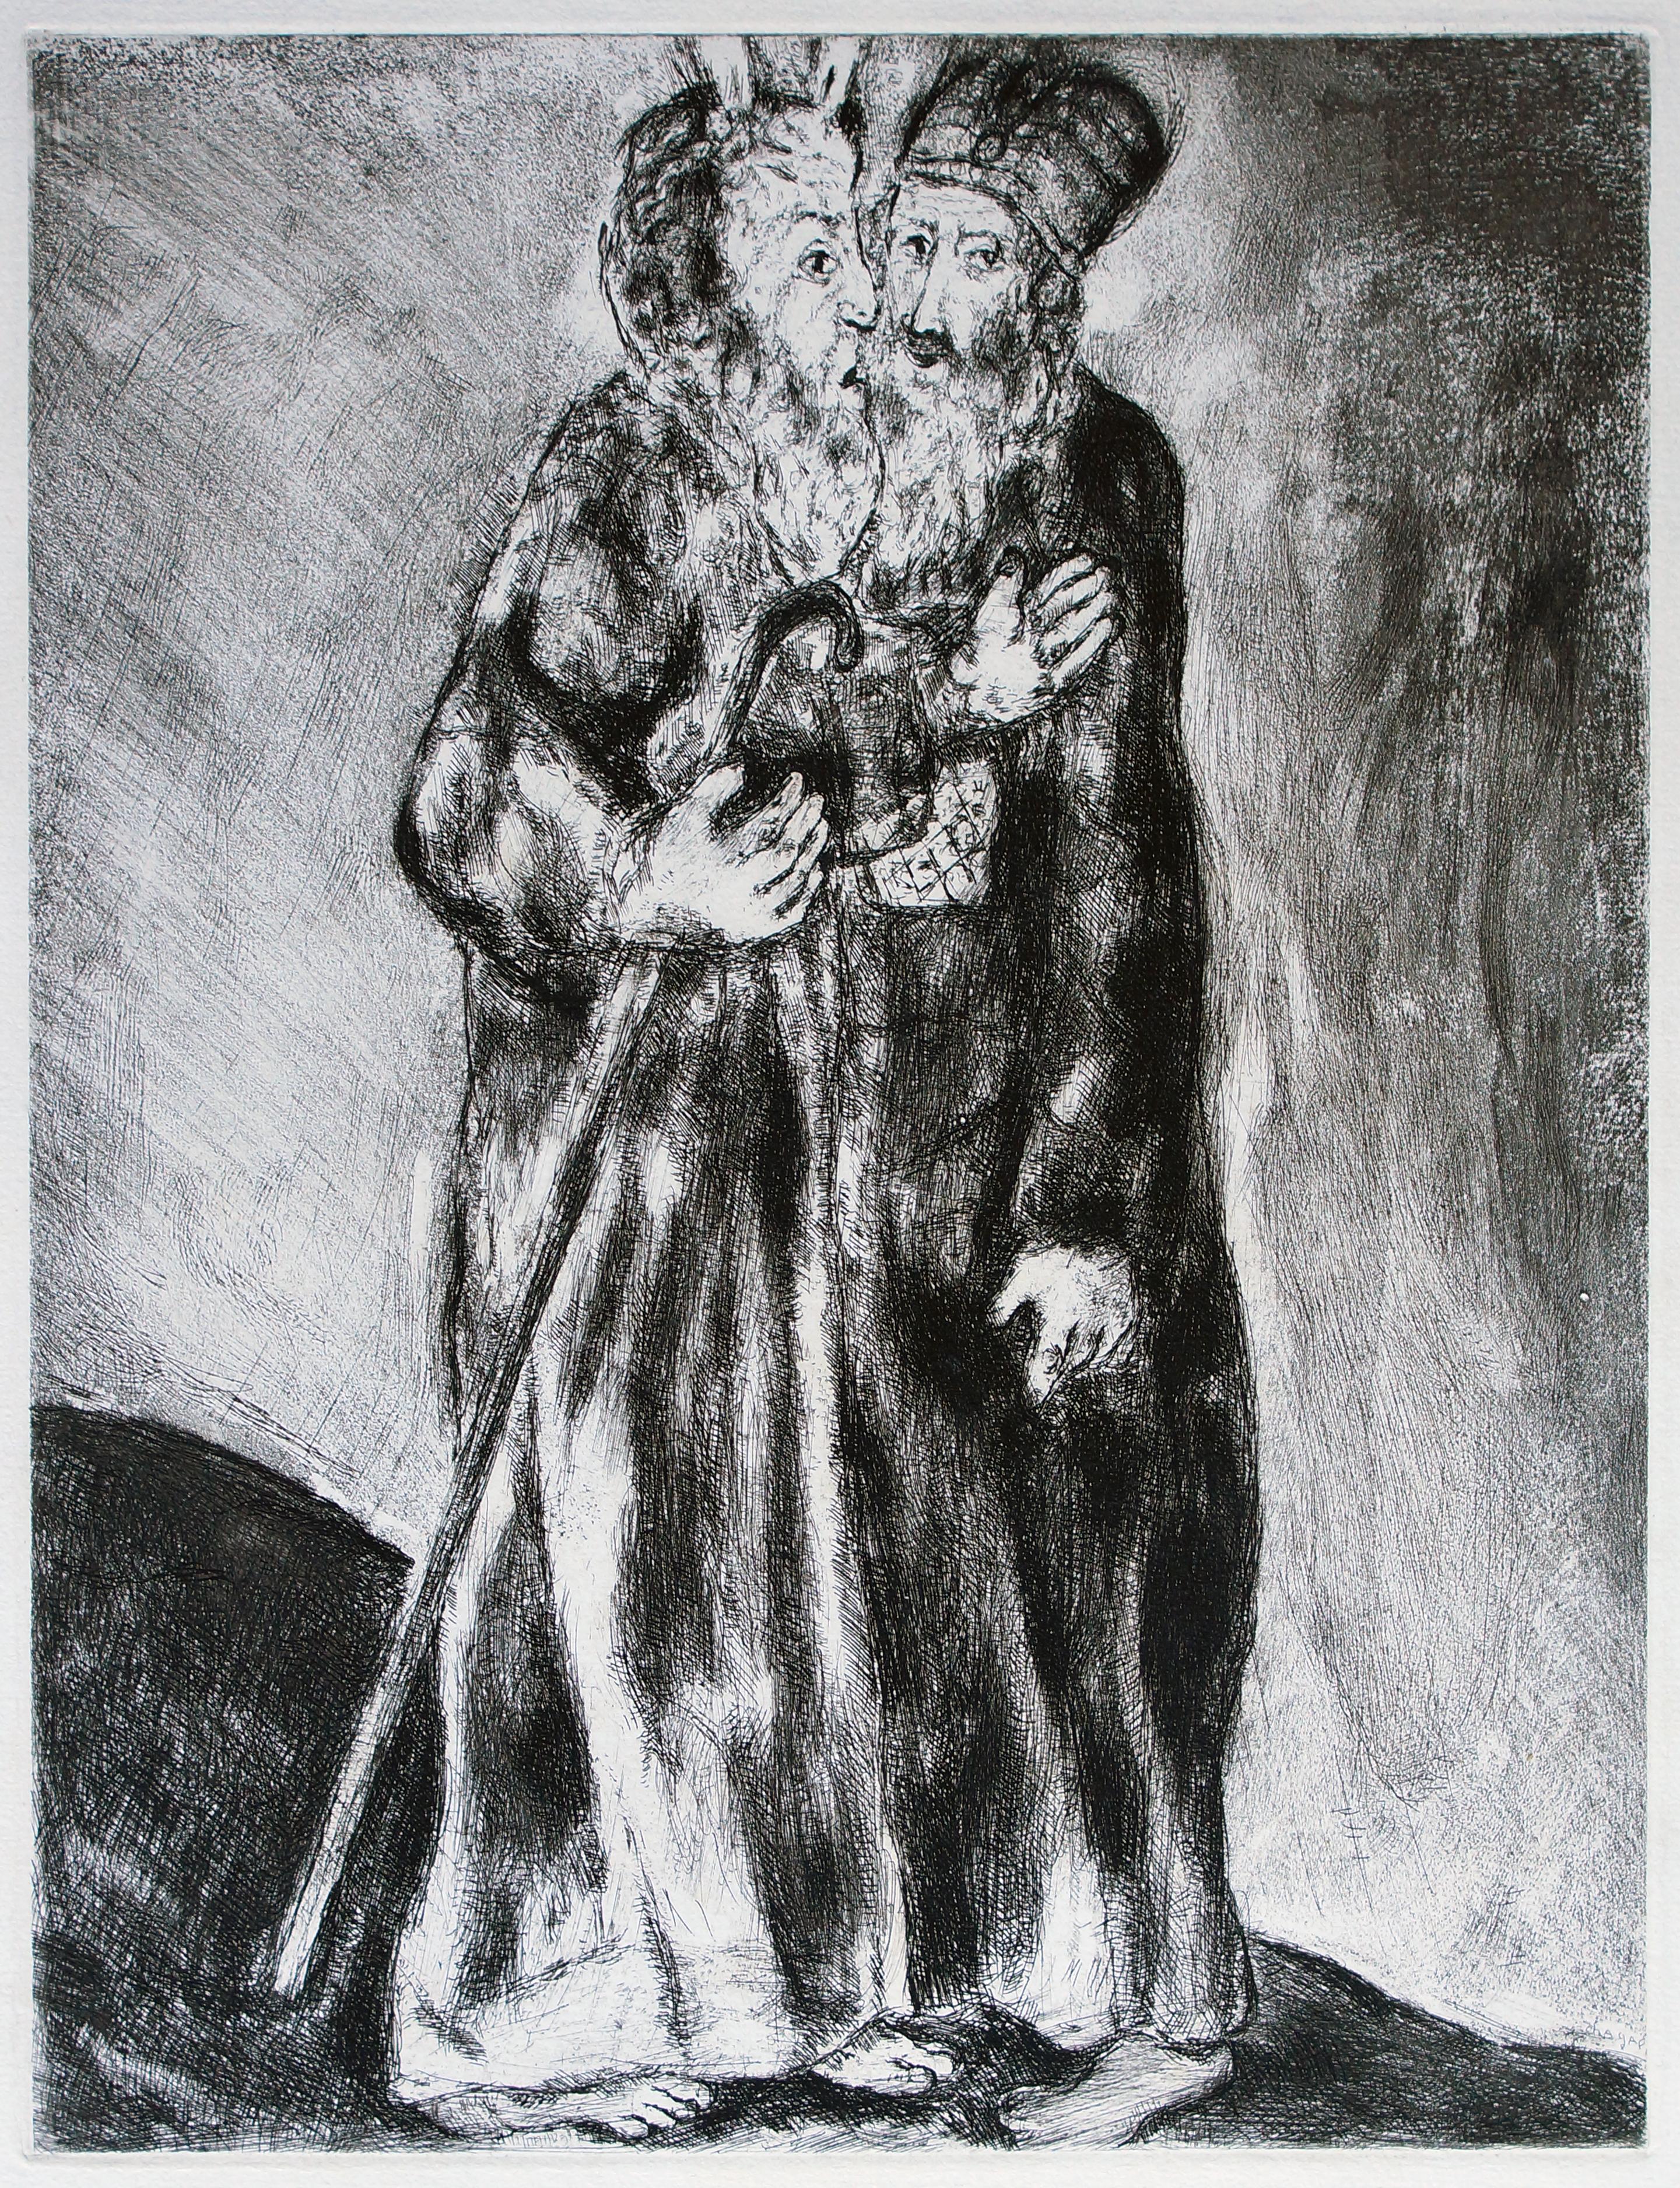 Moses Meets his Brother Aaron in the Desert  - Original Etching by M. Chagall - Art by Marc Chagall